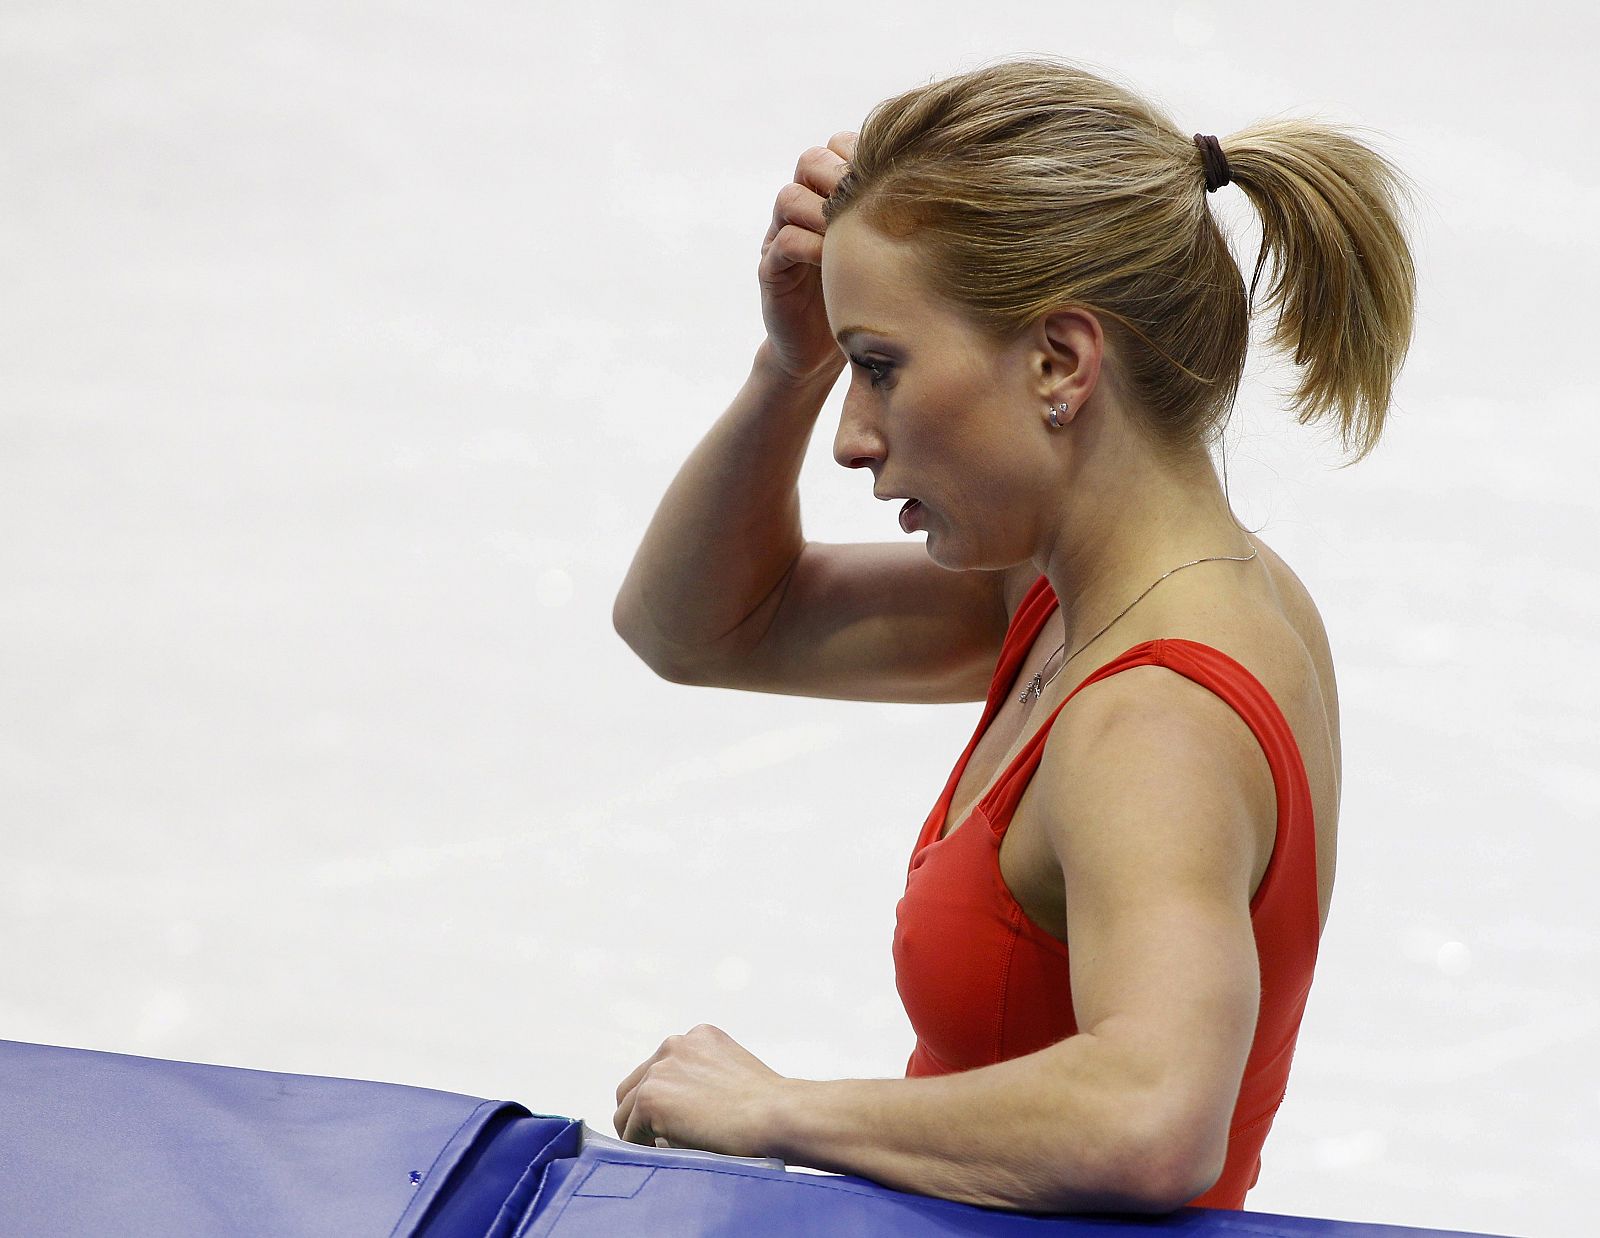 Canadian figure skater Rochette is seen during training during Vancouver 2010 Winter Olympics